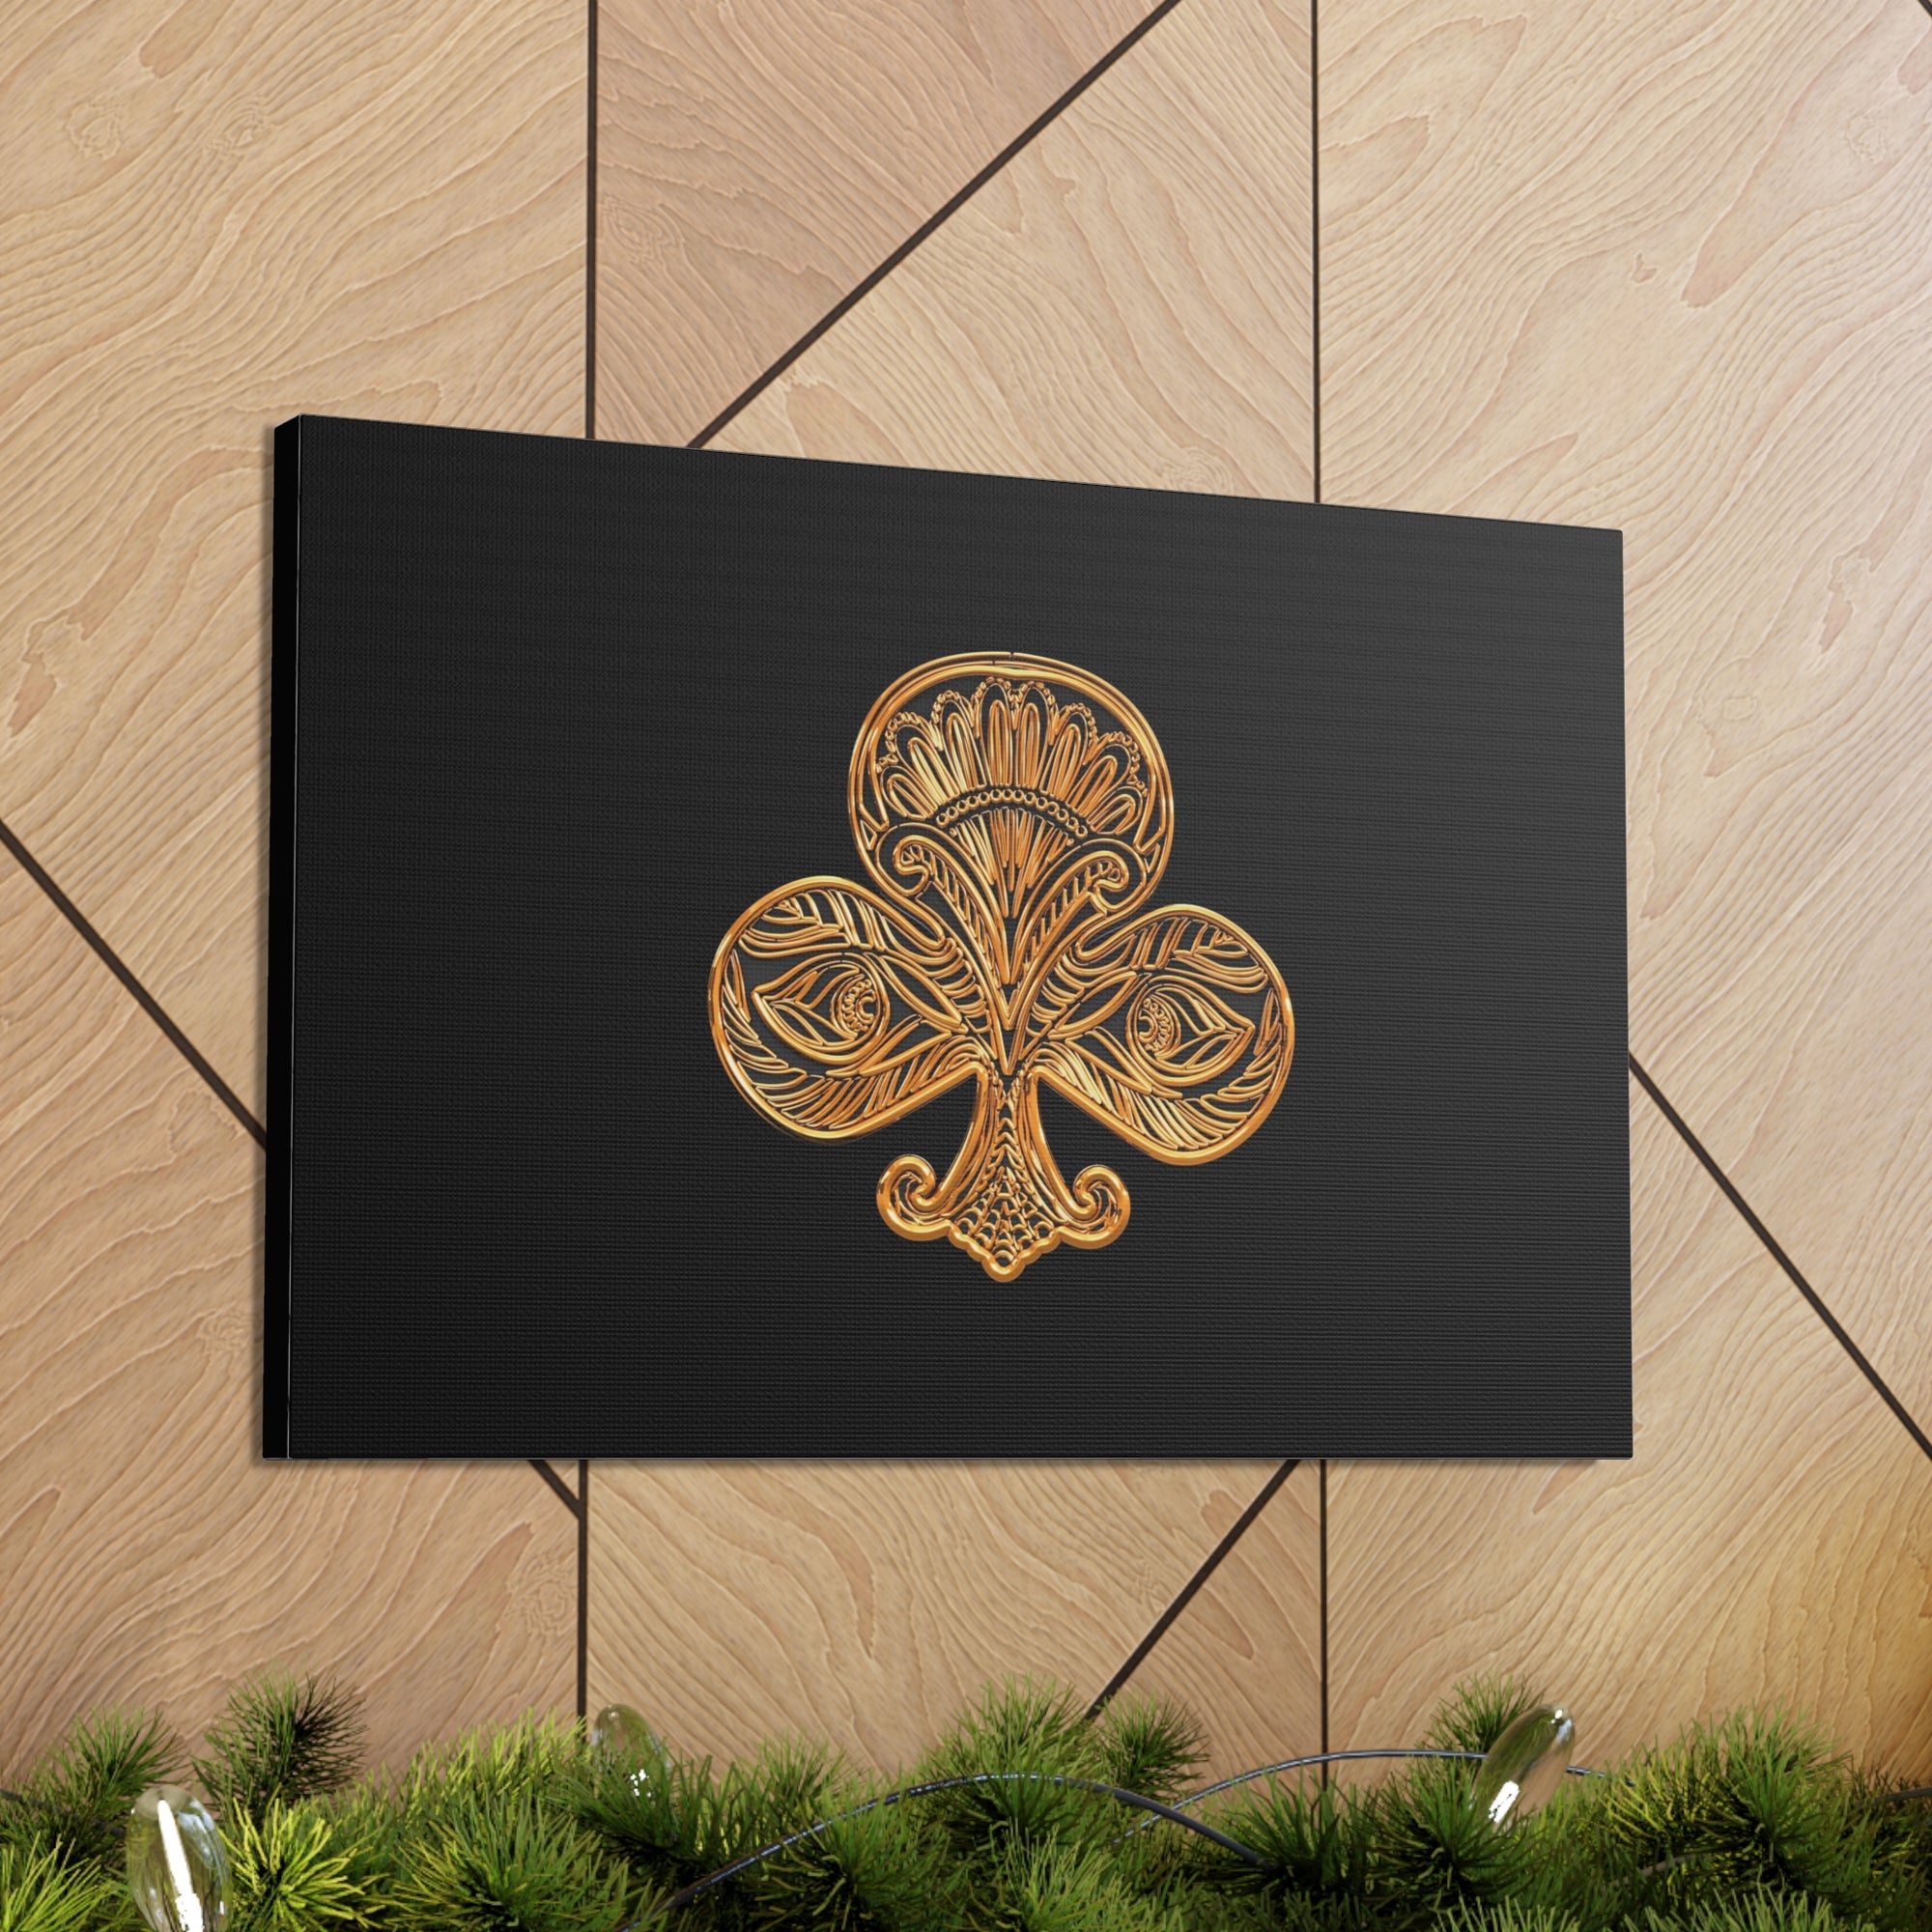 3D Gold Clubs Playing Card Canvas Wall Art for Home Decor Ready-to-Hang-Express Your Love Gifts